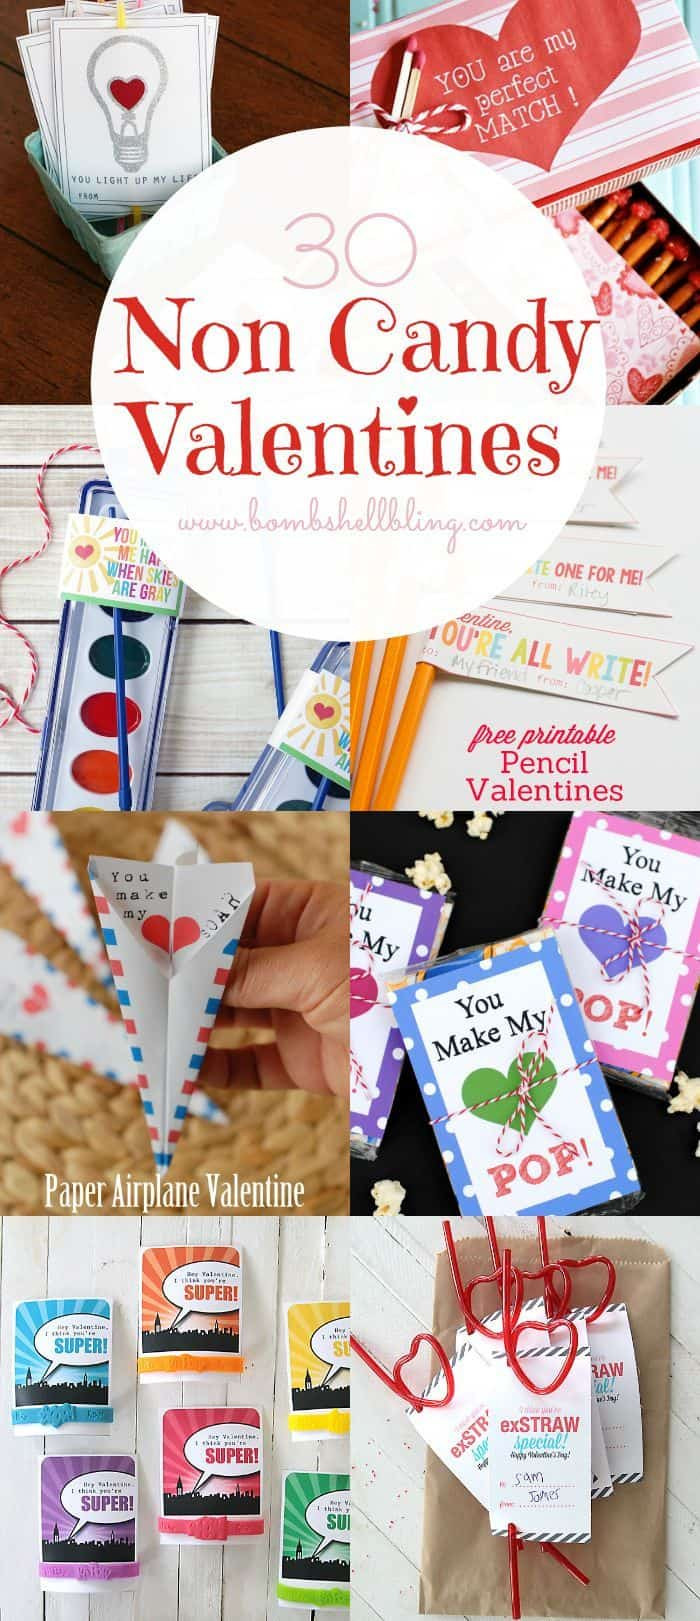 Valentines Candy Gift Ideas
 10 Non Candy Valentine s Day Gift Ideas for Kids